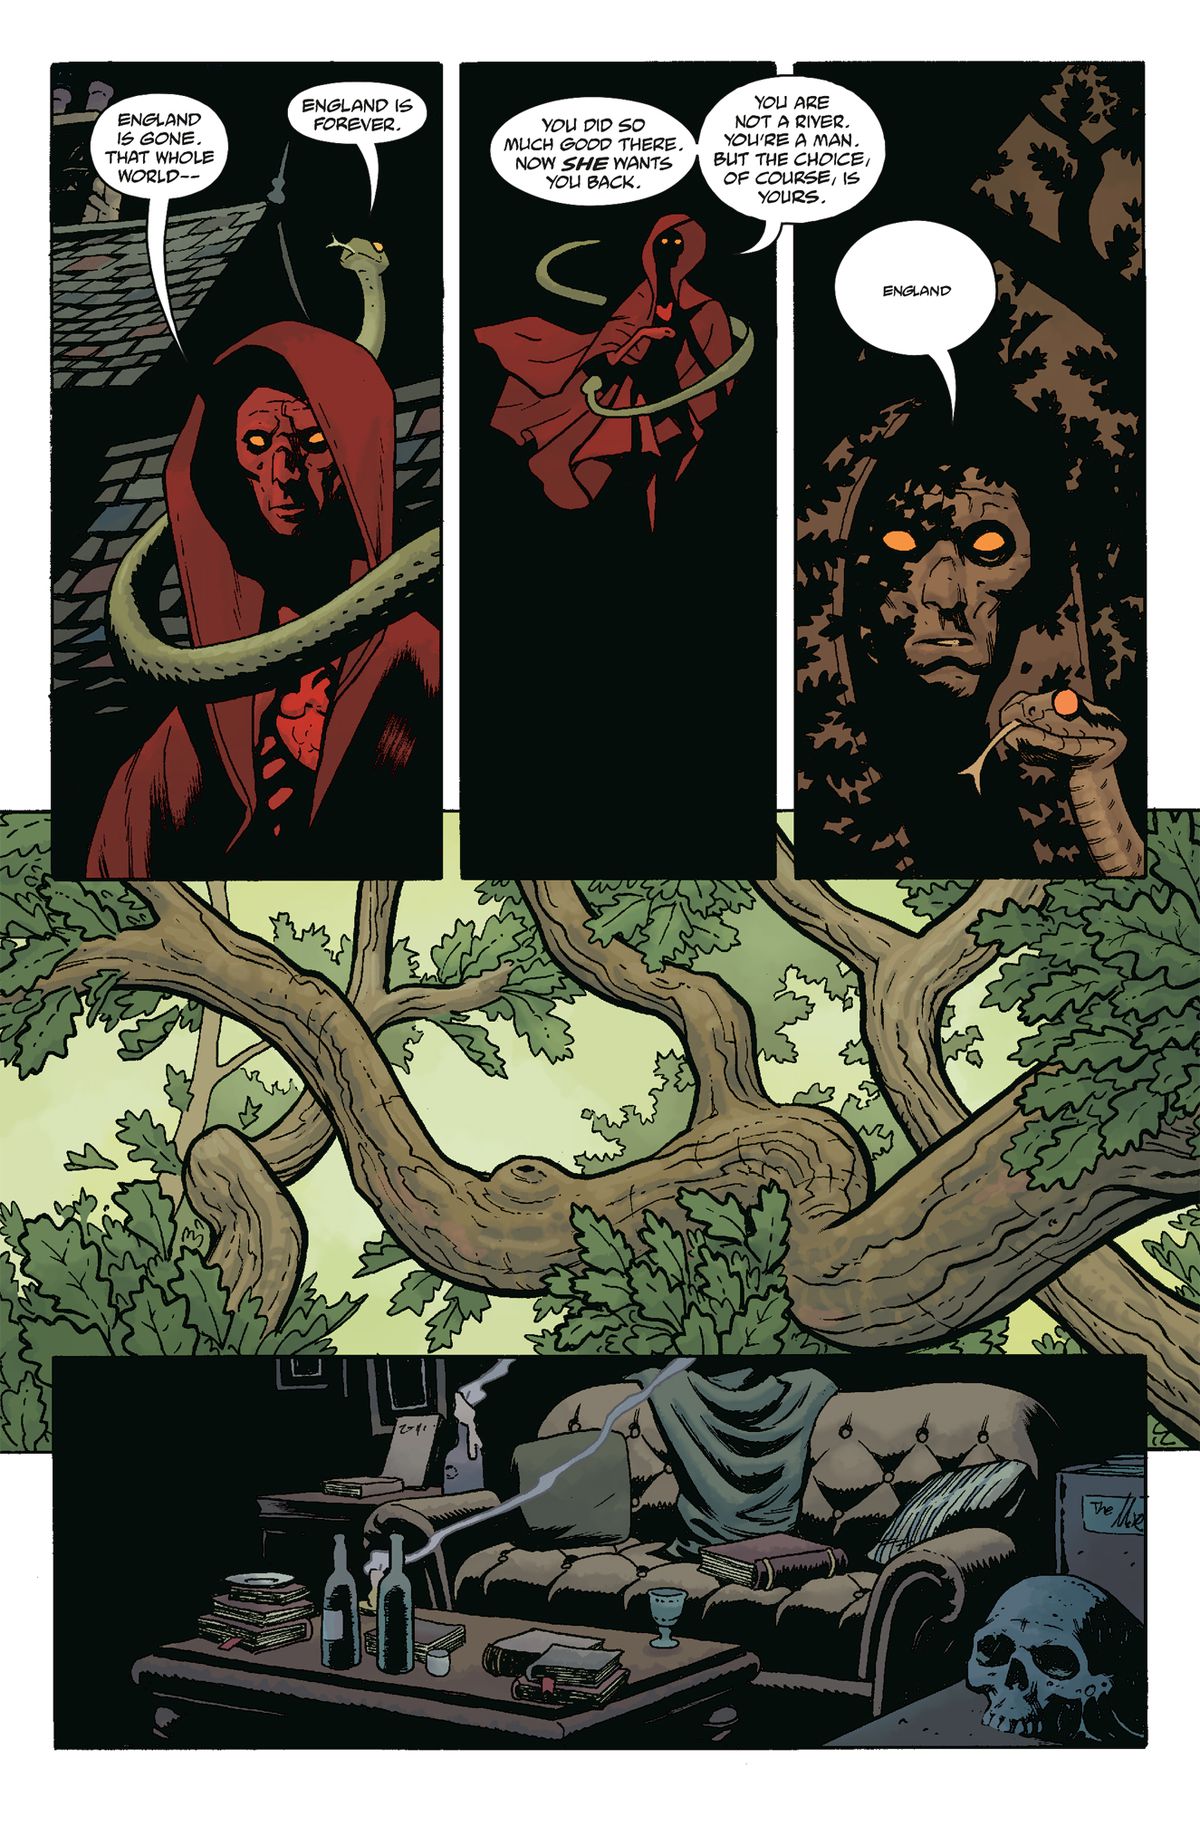 The snake tells Edward Grey that England, which no longer exists, still wants him back, and he chooses England, in Koshchei in Hell #1 (2022).